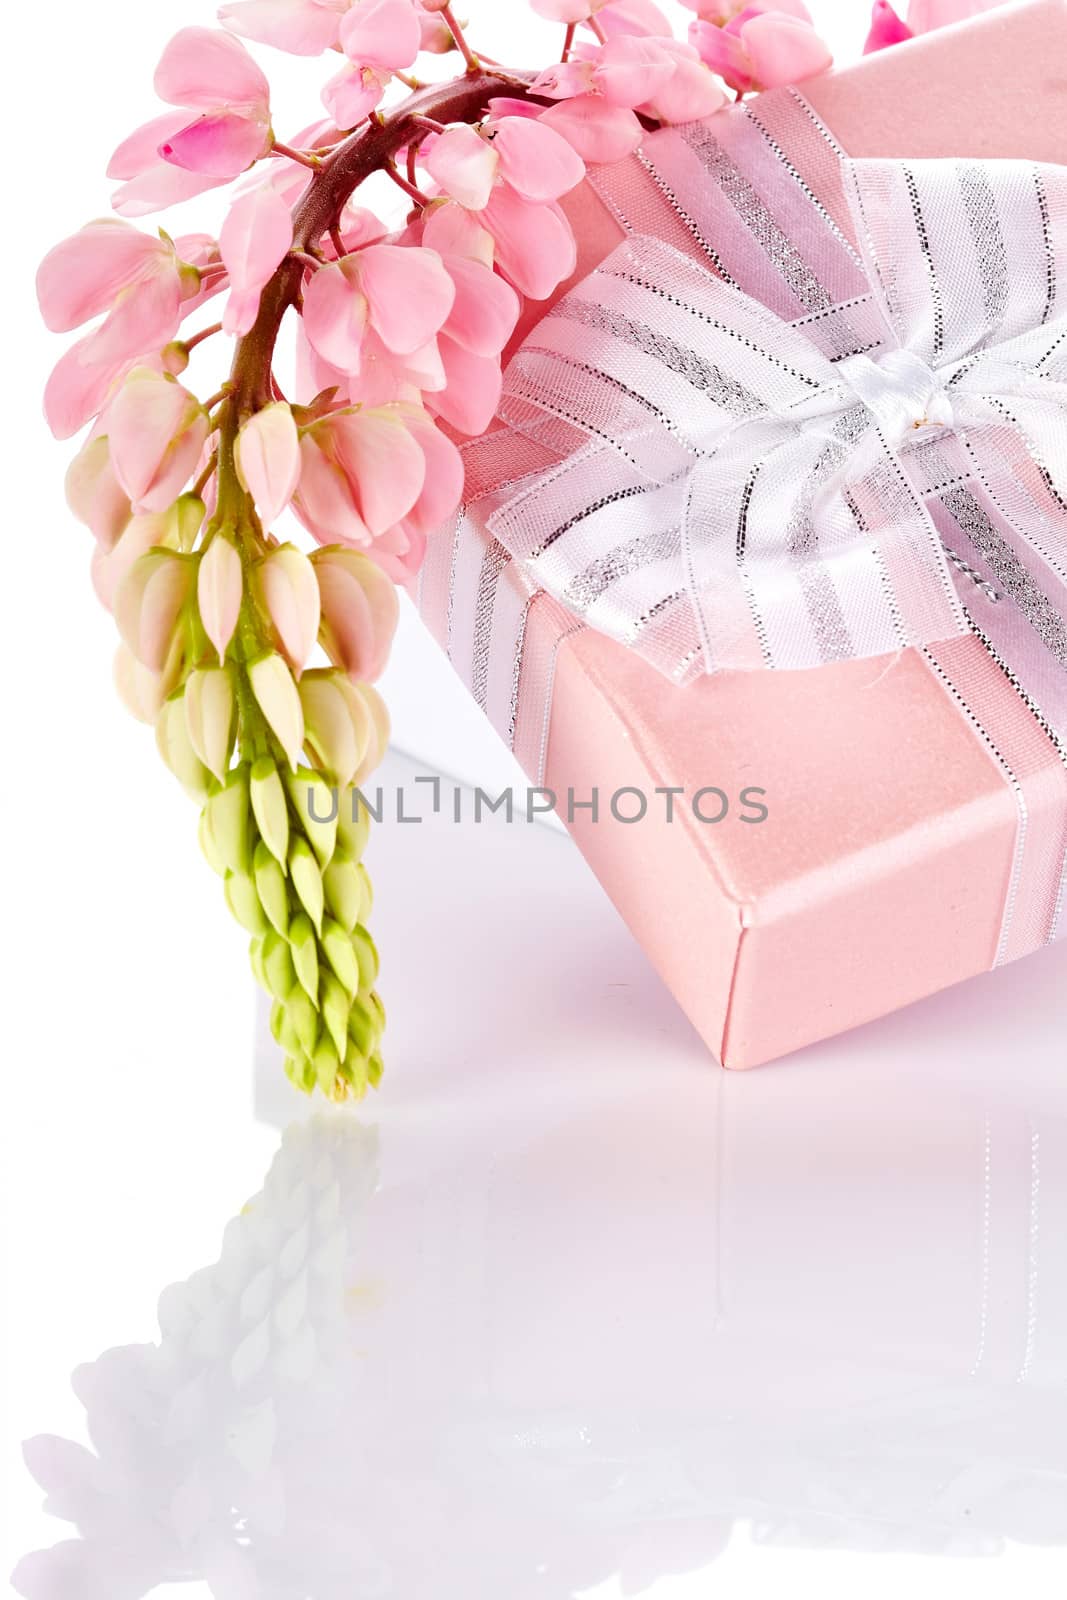 Lupine and gift box. Festive surprise. Box with a bow. Elegant gift. Gift box and lupine flowers.